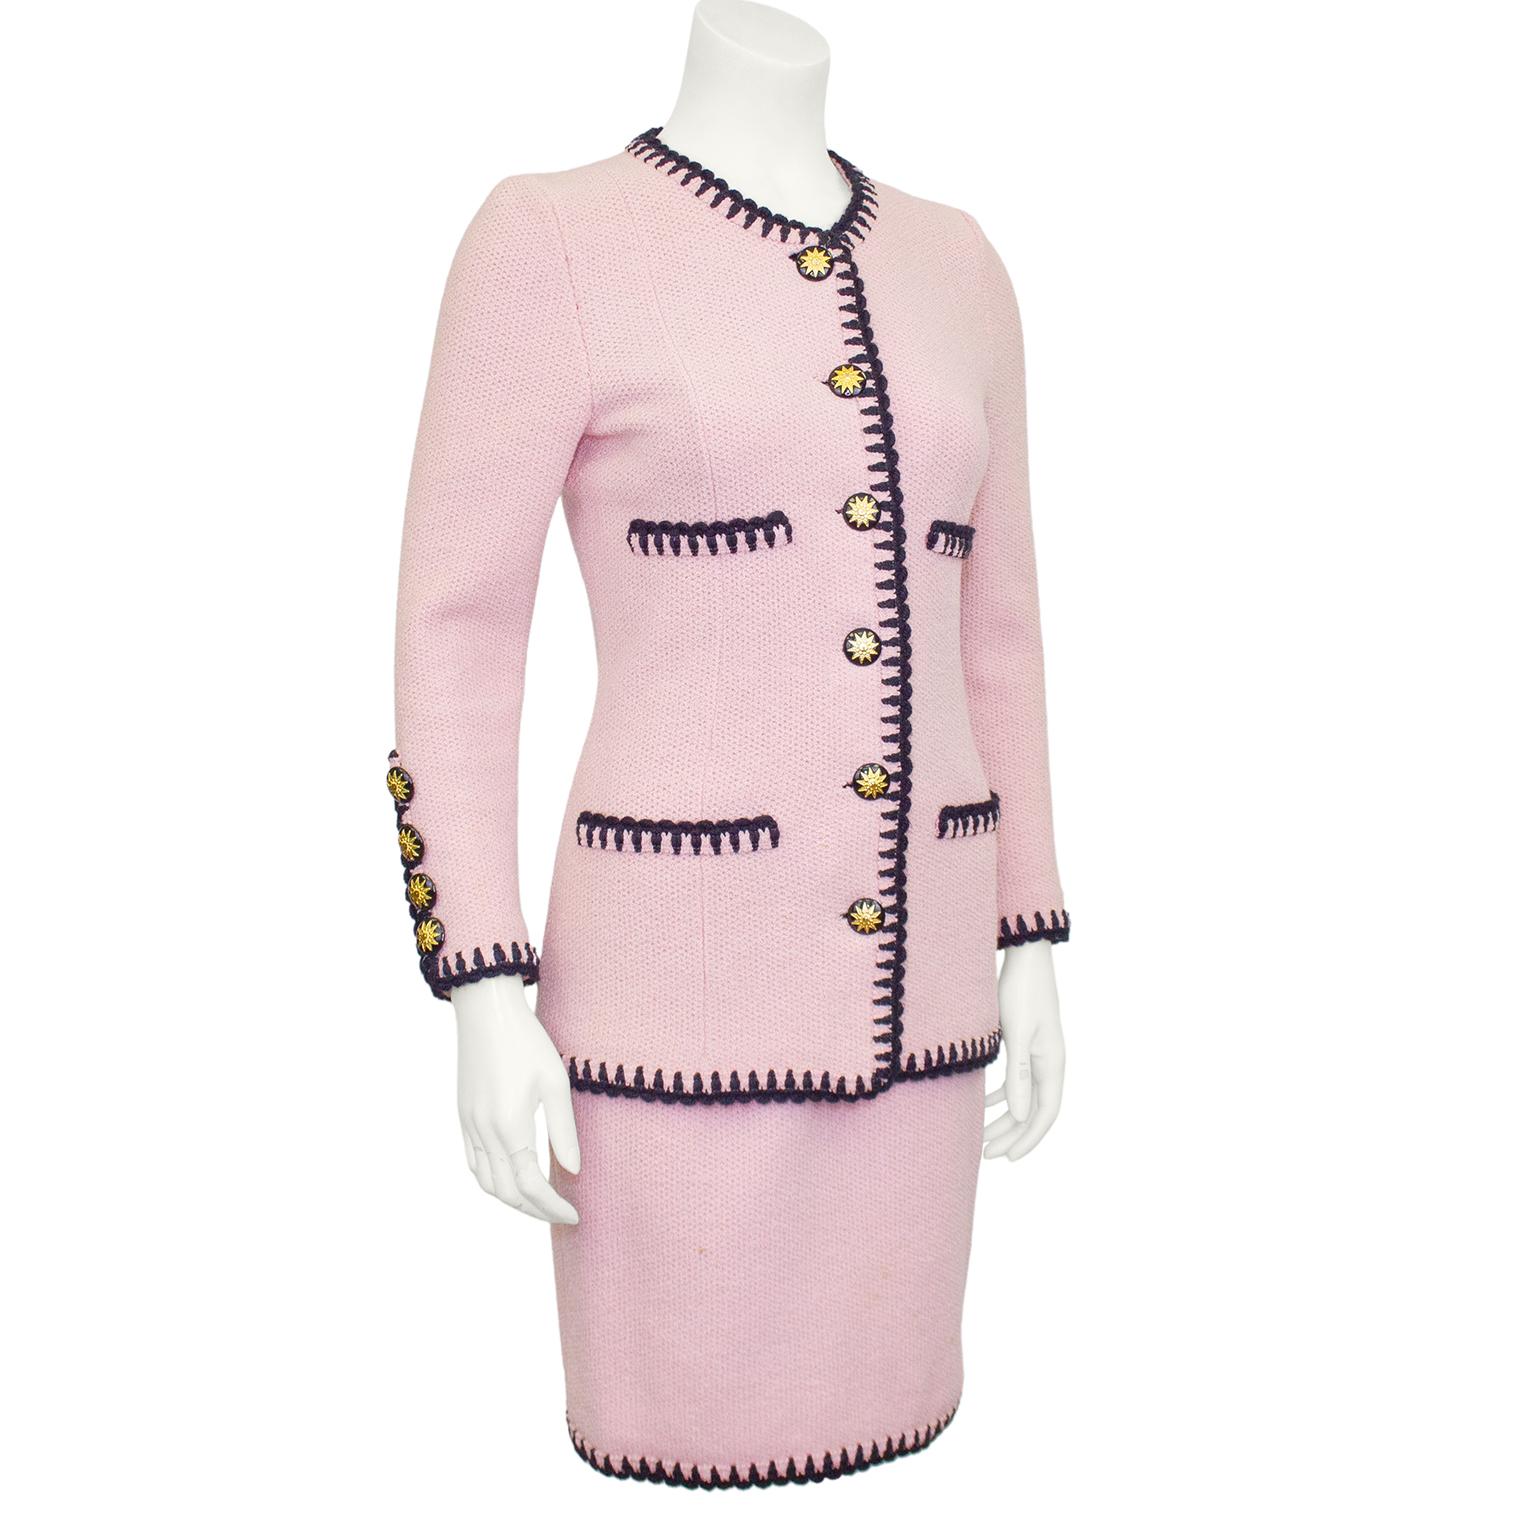 Stunning Adolfo skirt suit from the 1980s. Pale pink knit wool with black wool scallop trim at neckline, pockets,  cuffs and hem. Jacket is collarless with four faux pockets and large black buttons with gold stars. Skirt is high waisted with elastic